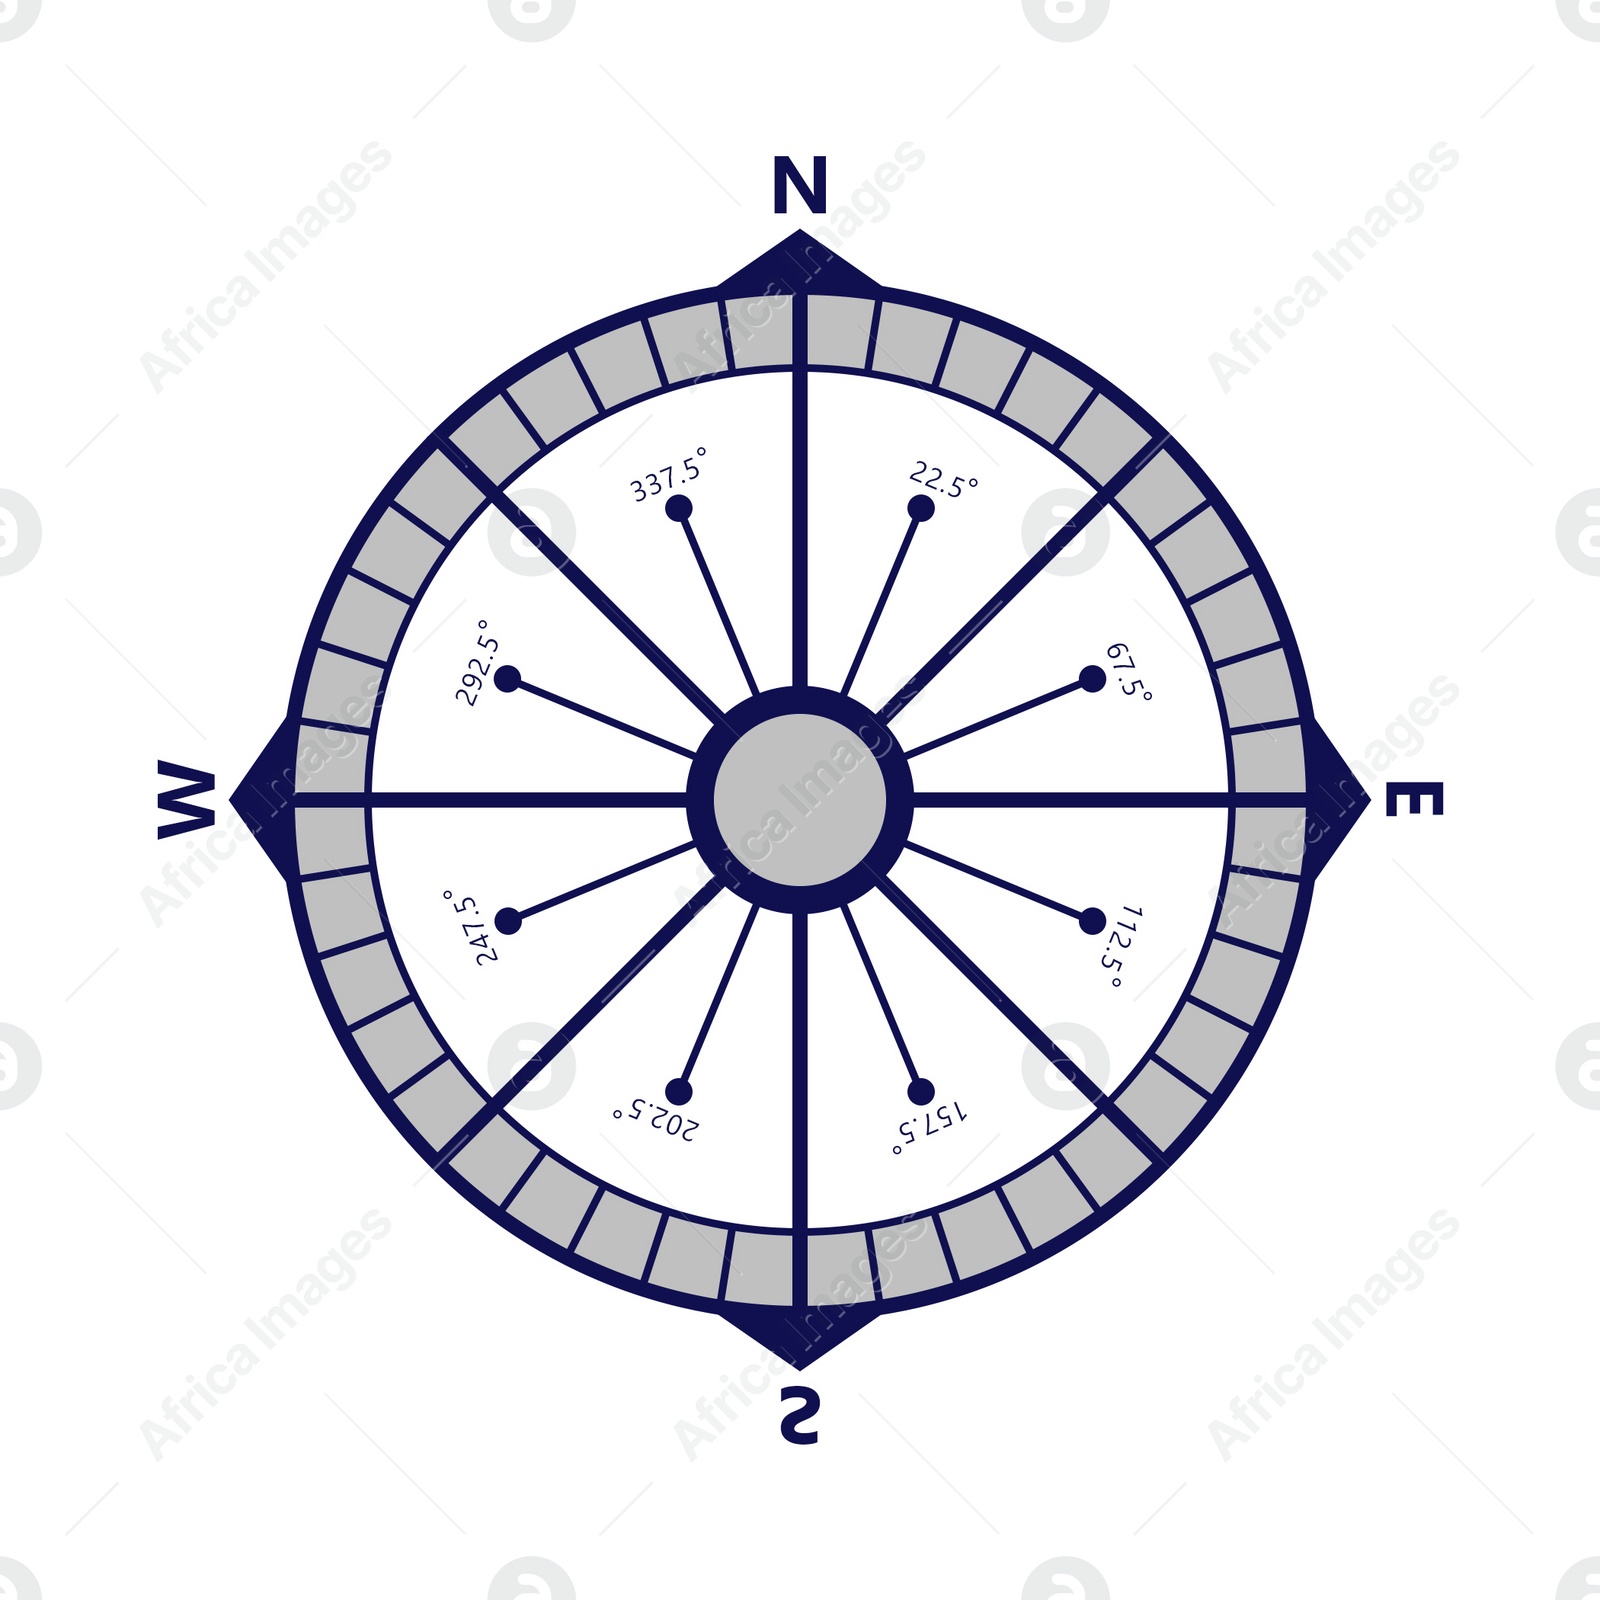 Illustration of Compass rose with four cardinal directions - North, East, South, West on white background. Illustration